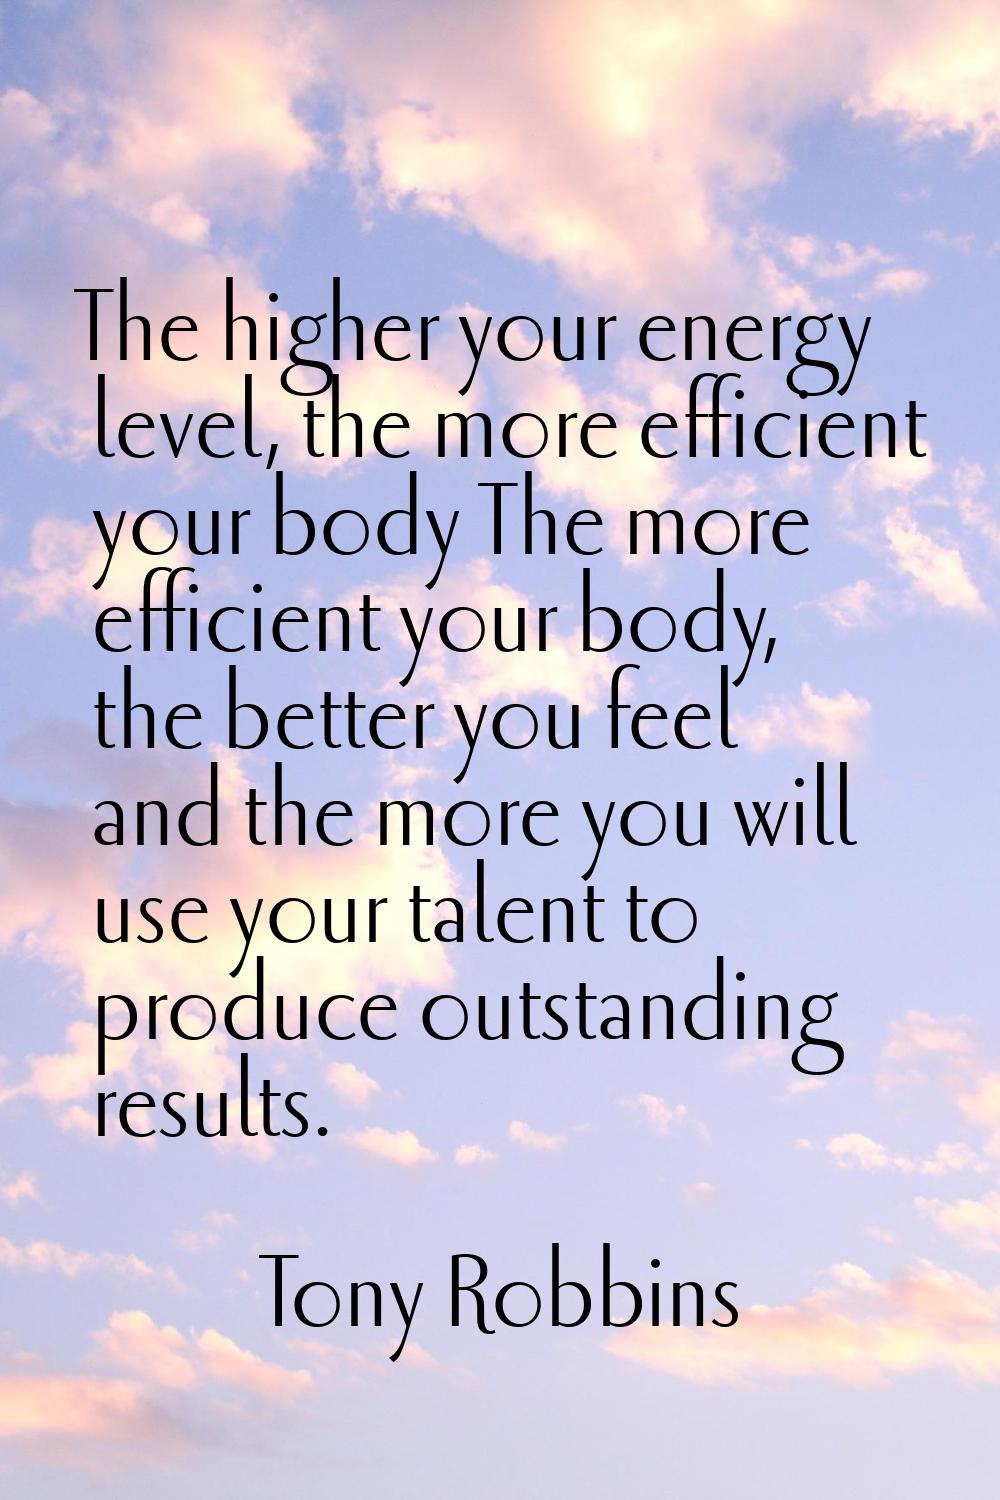 The higher your energy level, the more efficient your body The more efficient your body, the better